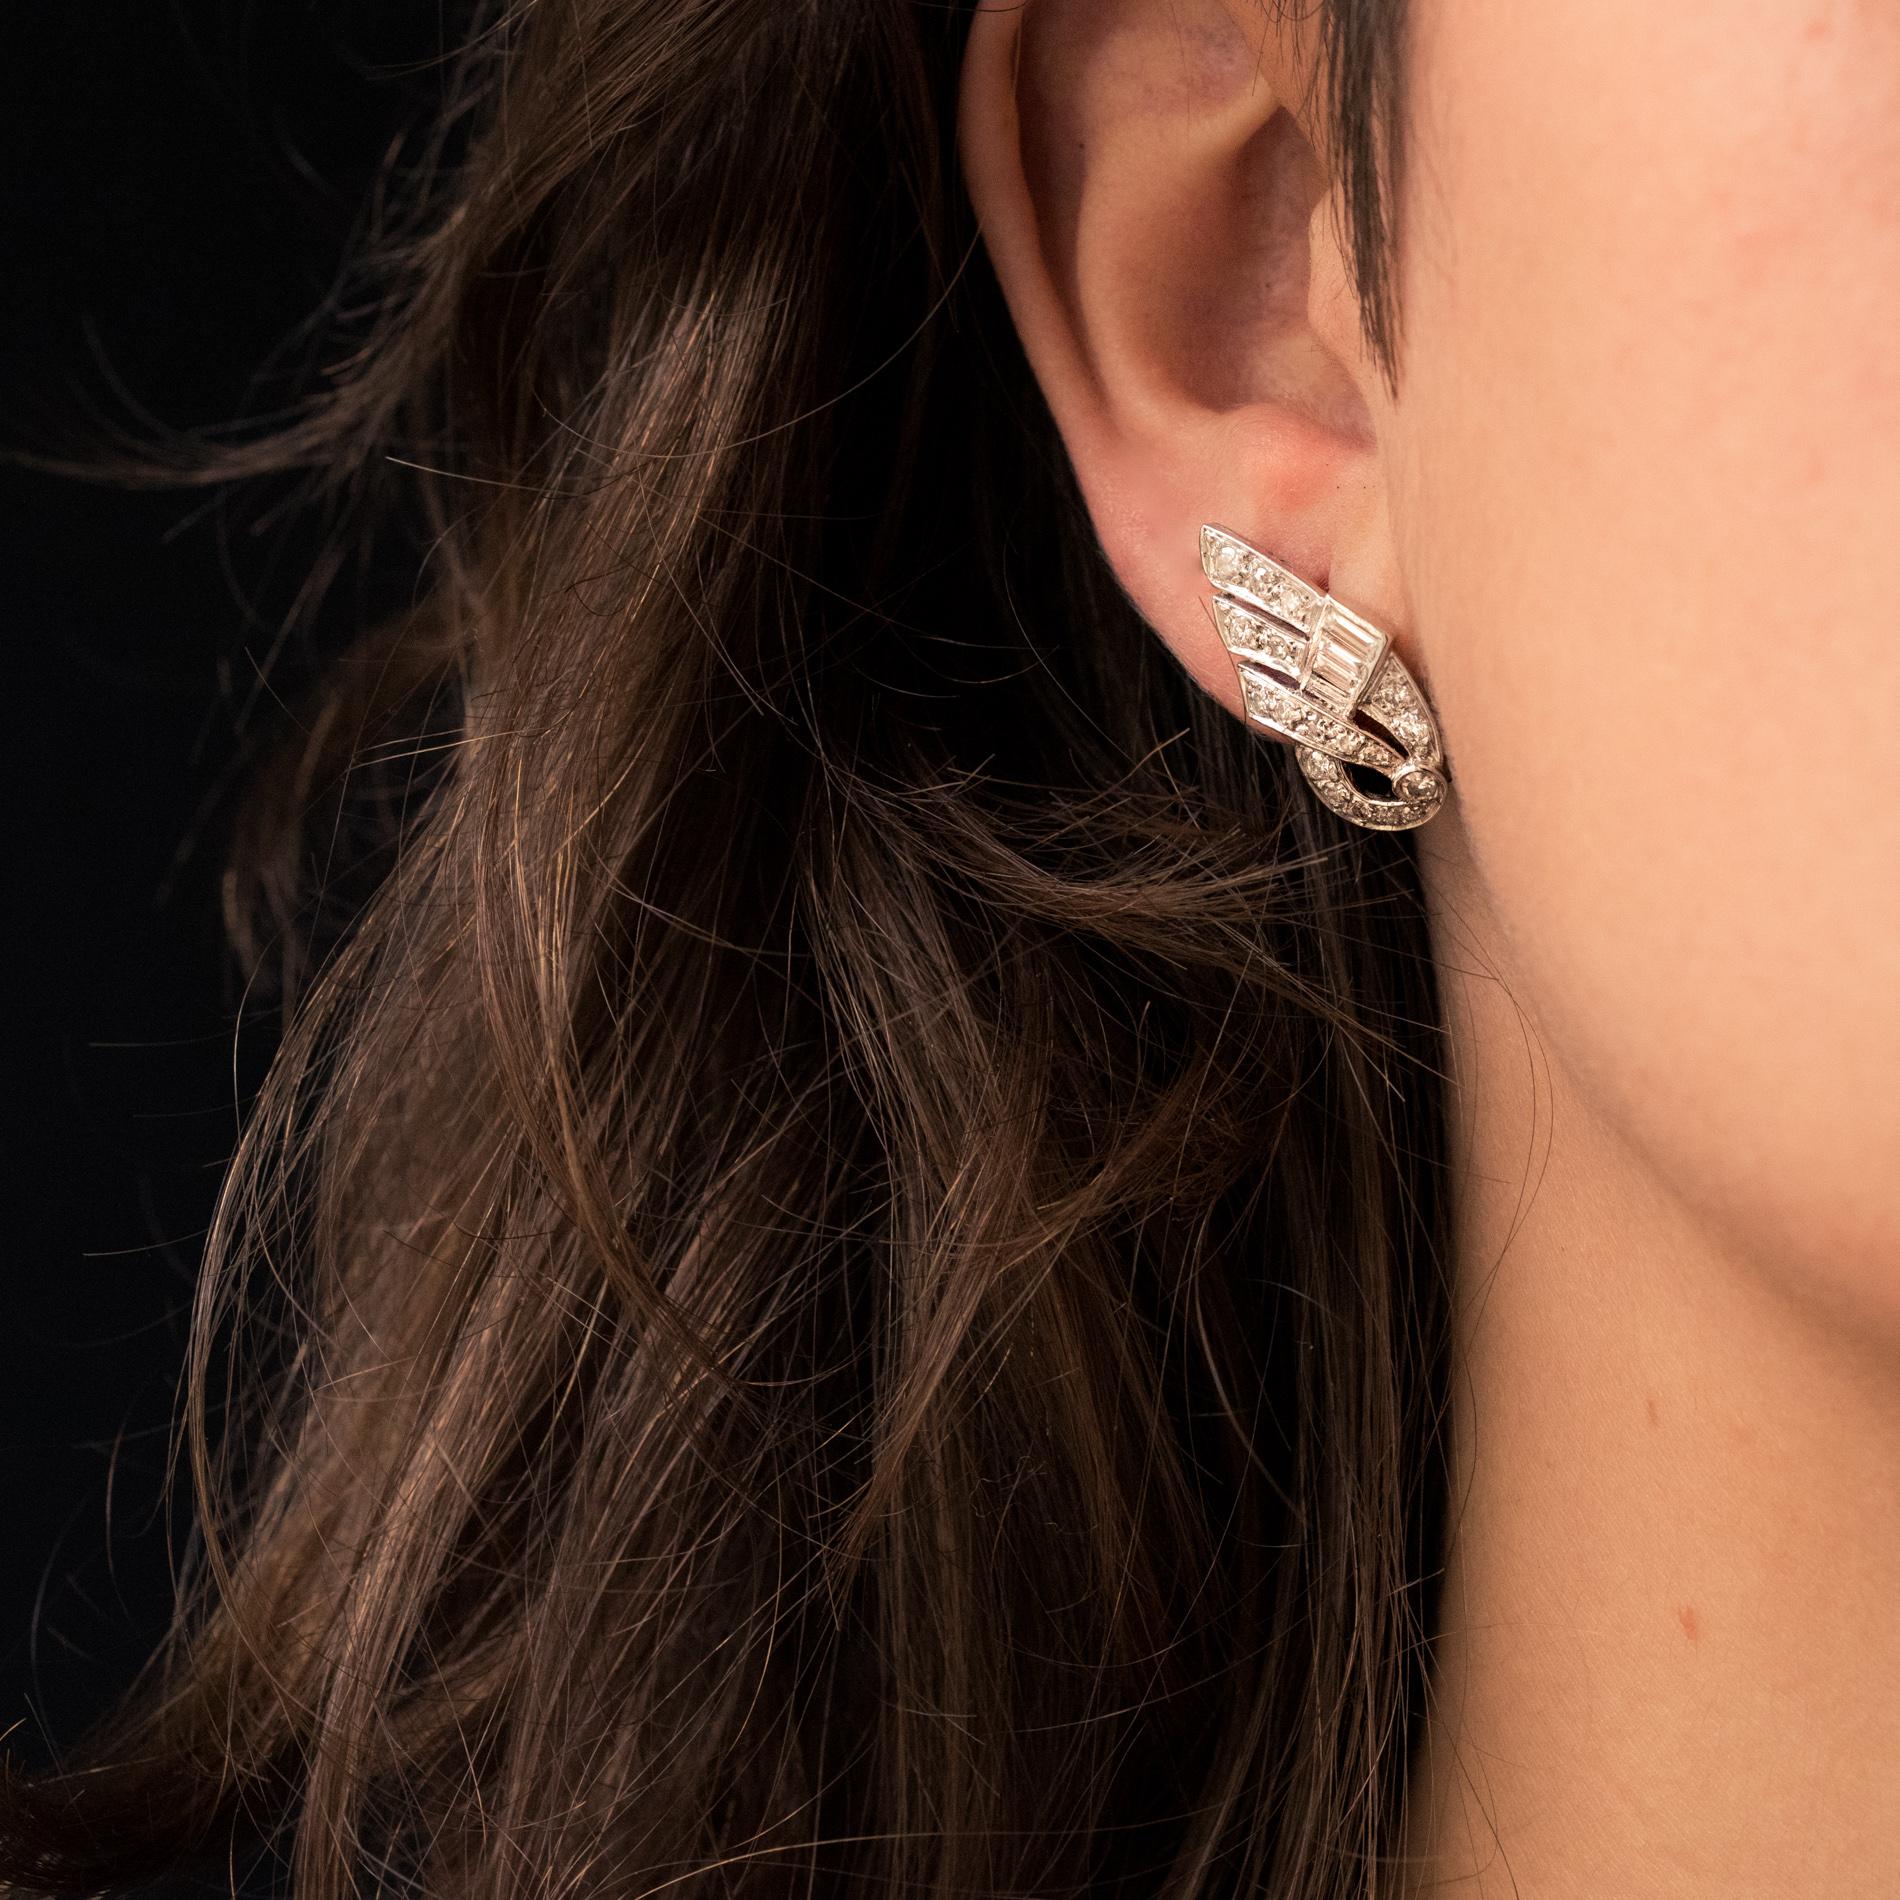 For pierced ears.
Pair of ear clips in platinum, dog's head hallmark and 18 karat white gold, eagle's head hallmark.
Each of these earrings, in the shape of an extended wing, is set with brilliant-cut and baguette-cut diamonds. The attachment system